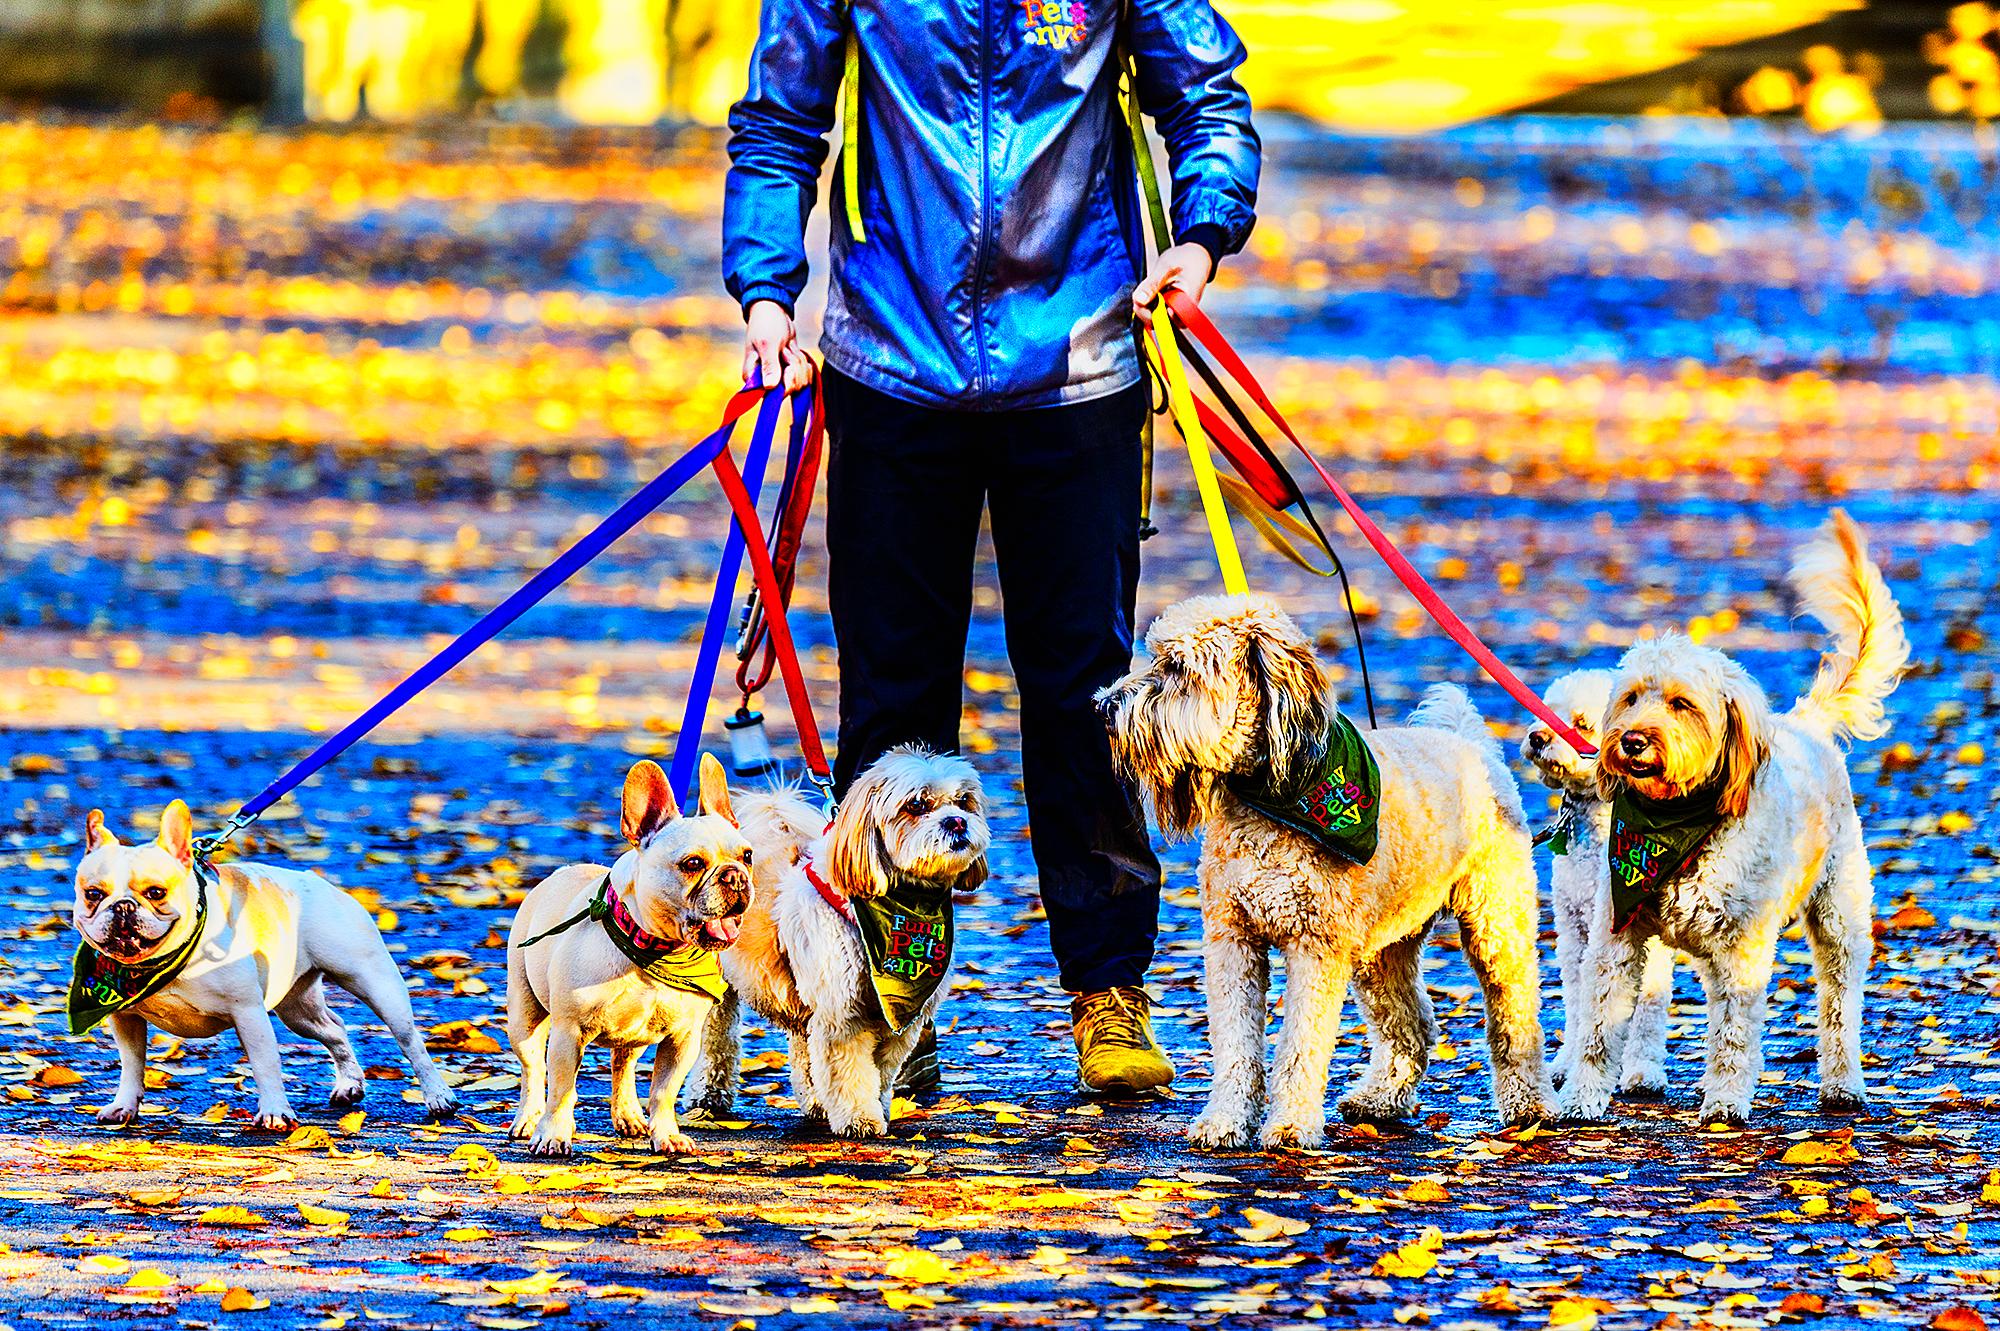 Five Dogs on a Leash, Central Park